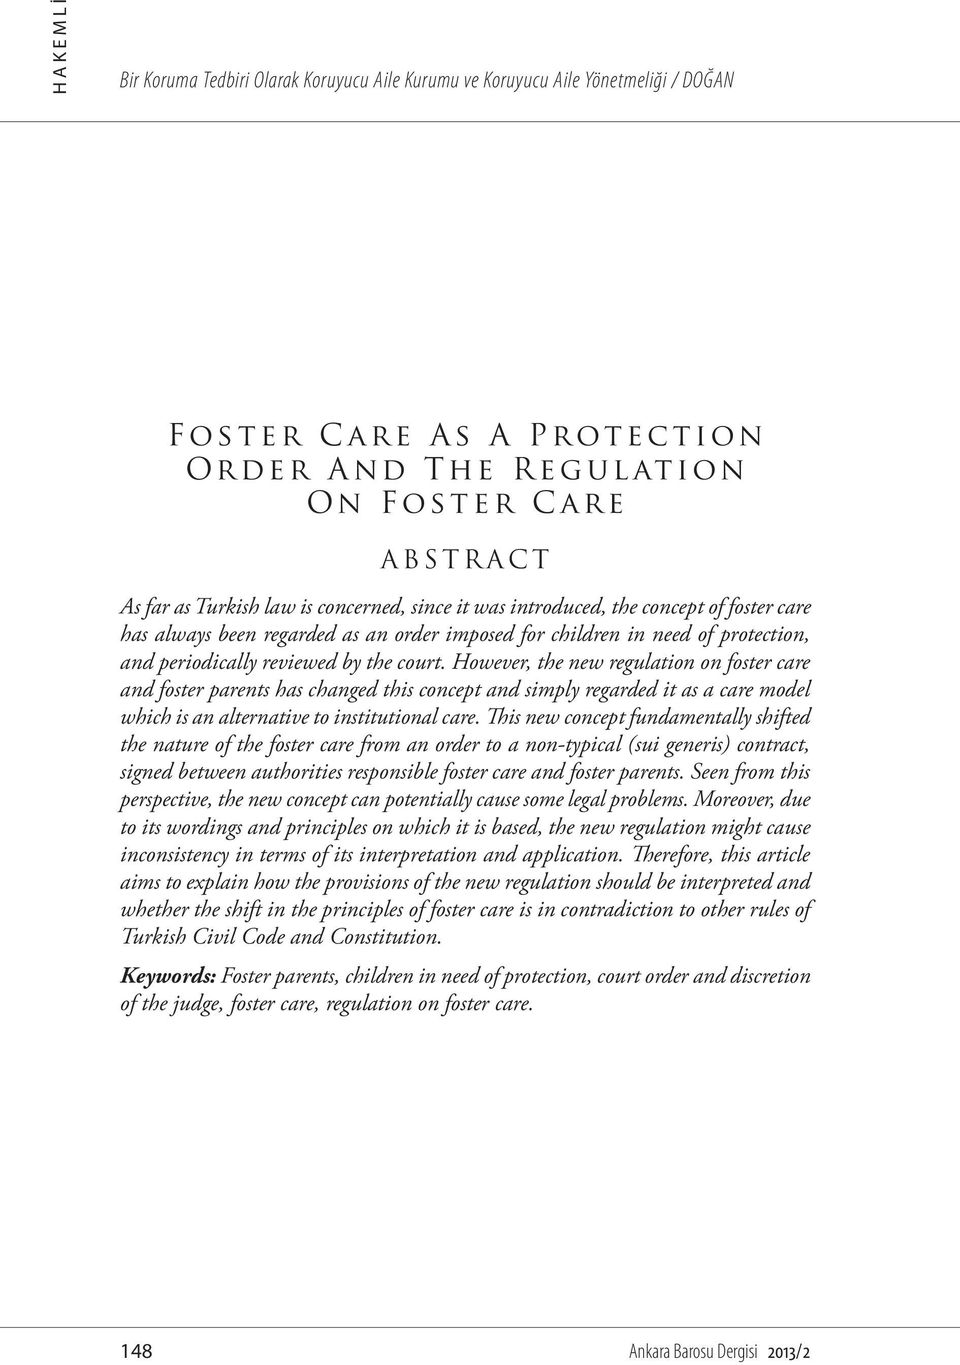 However, the new regulation on foster care and foster parents has changed this concept and simply regarded it as a care model which is an alternative to institutional care.